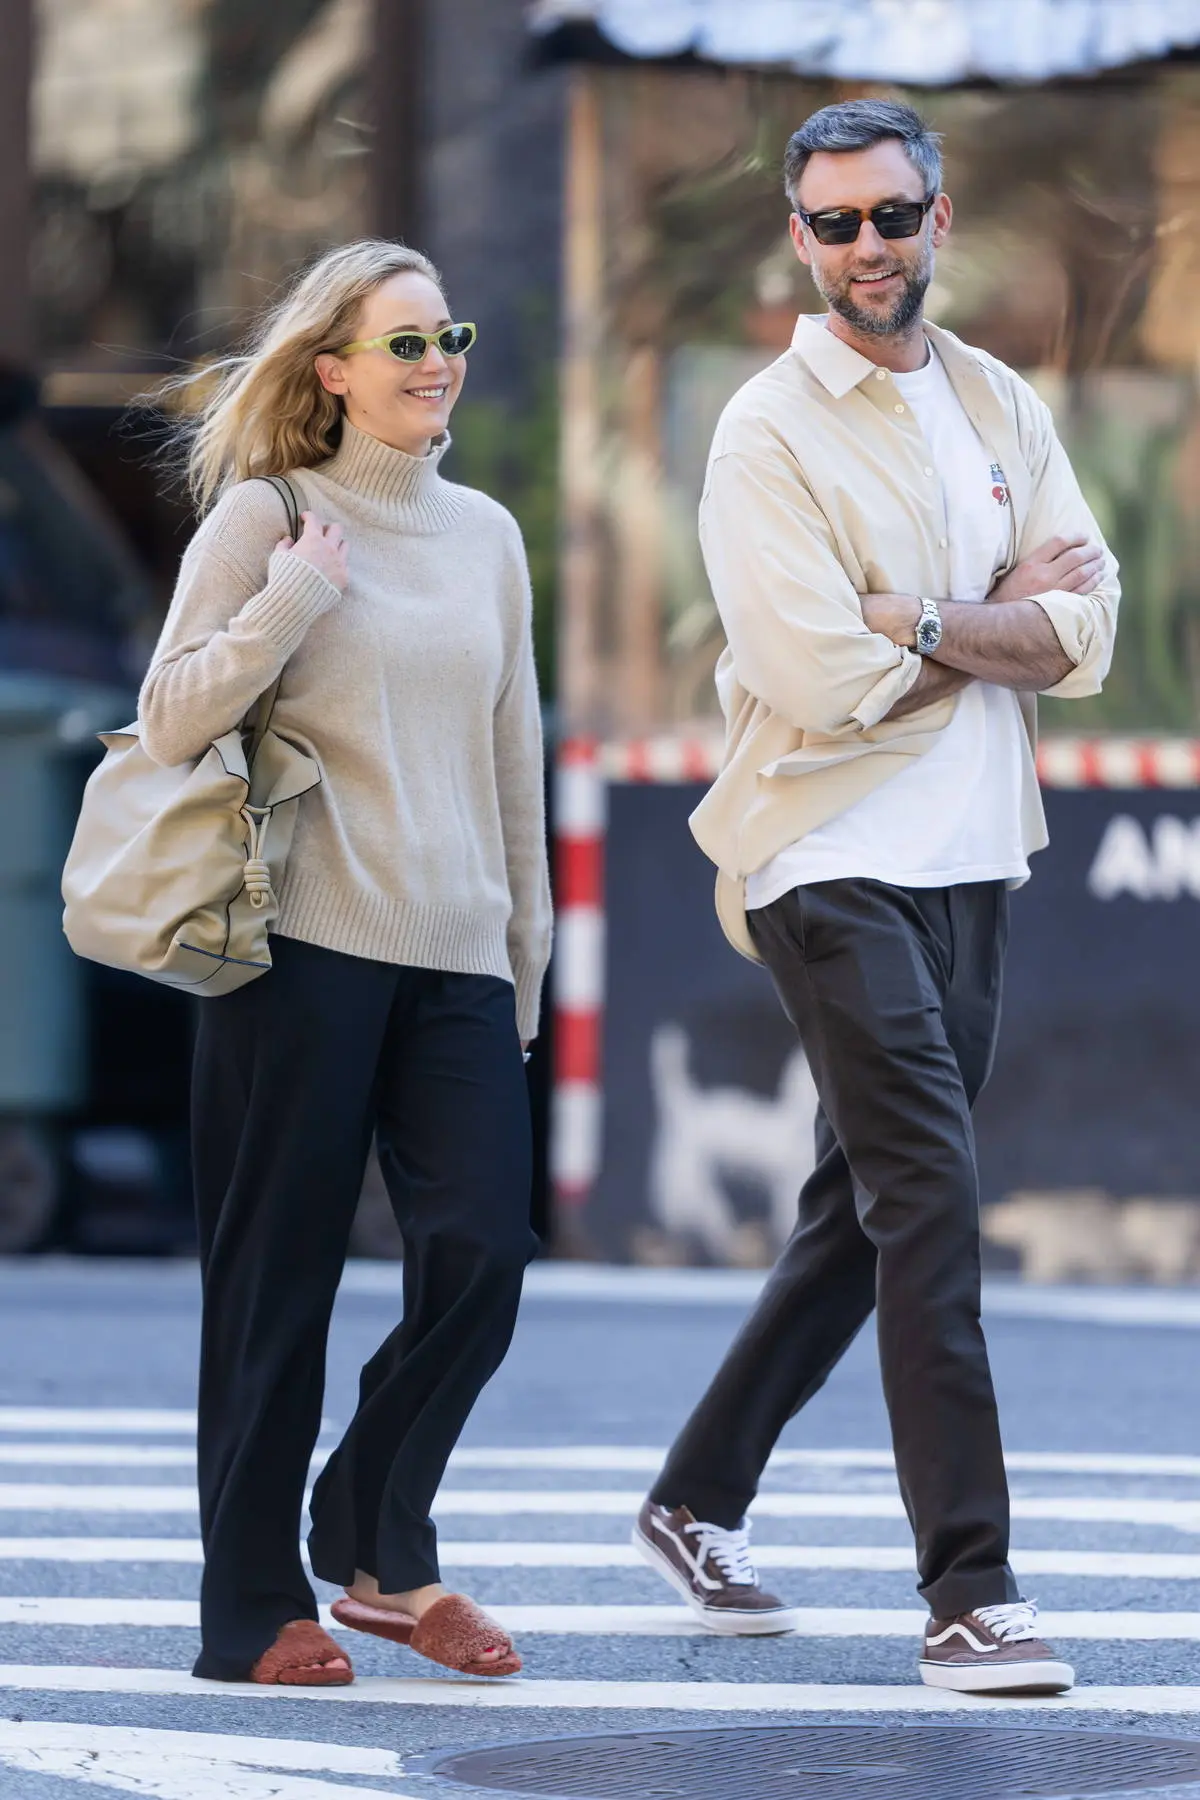 Jennifer-Lawrence-is-all-smiles-while-enjoying-a-stroll-with-husband-Cooke-Maroney-in-New-York-City-170923_9